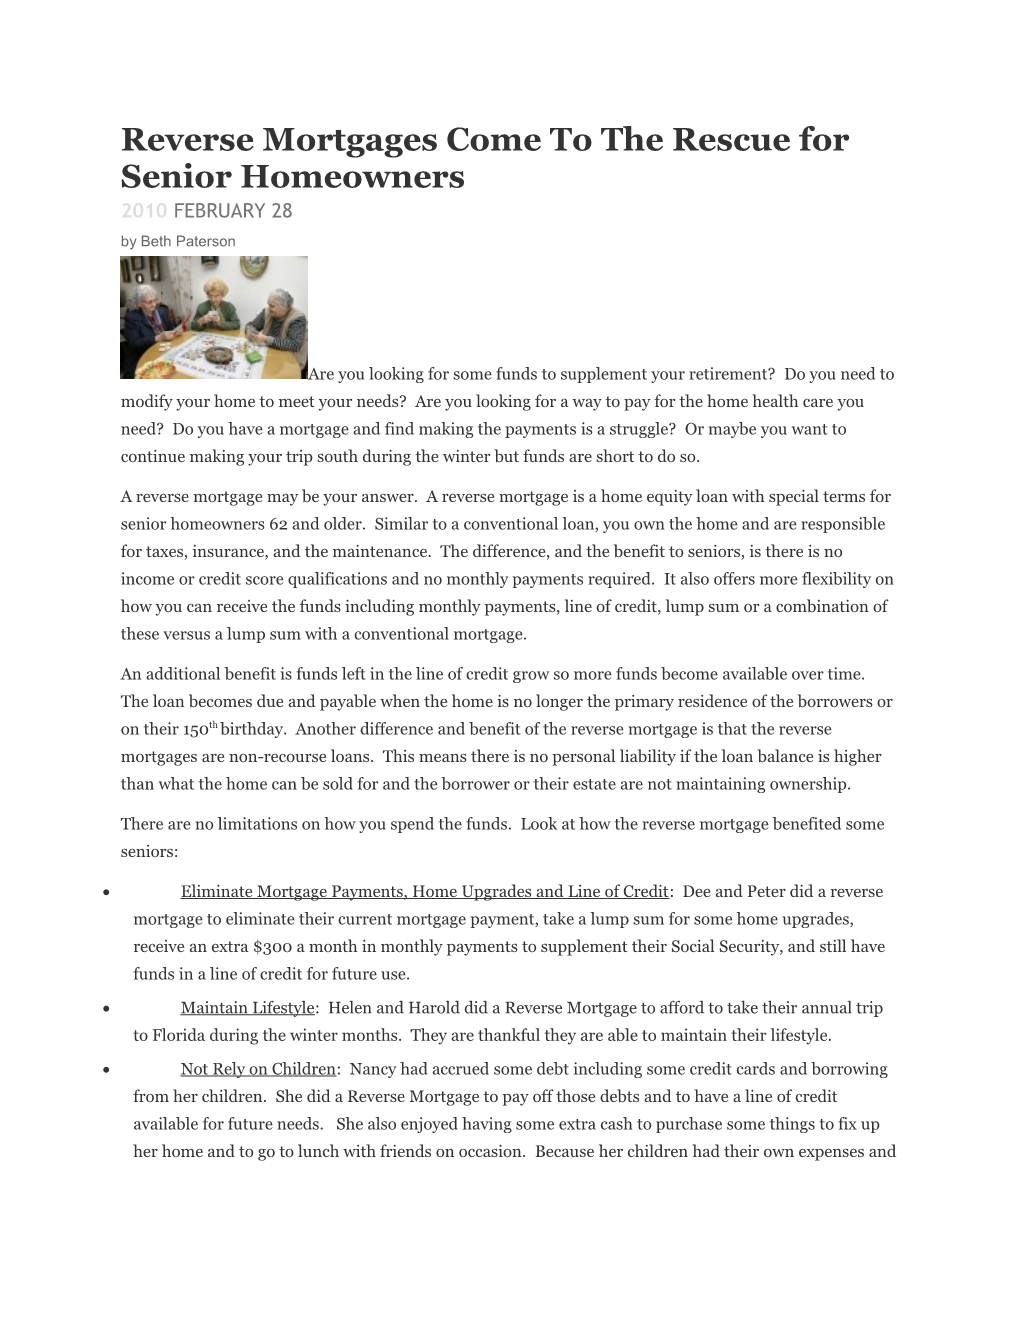 Reverse Mortgages Come to the Rescue for Seniorhomeowners